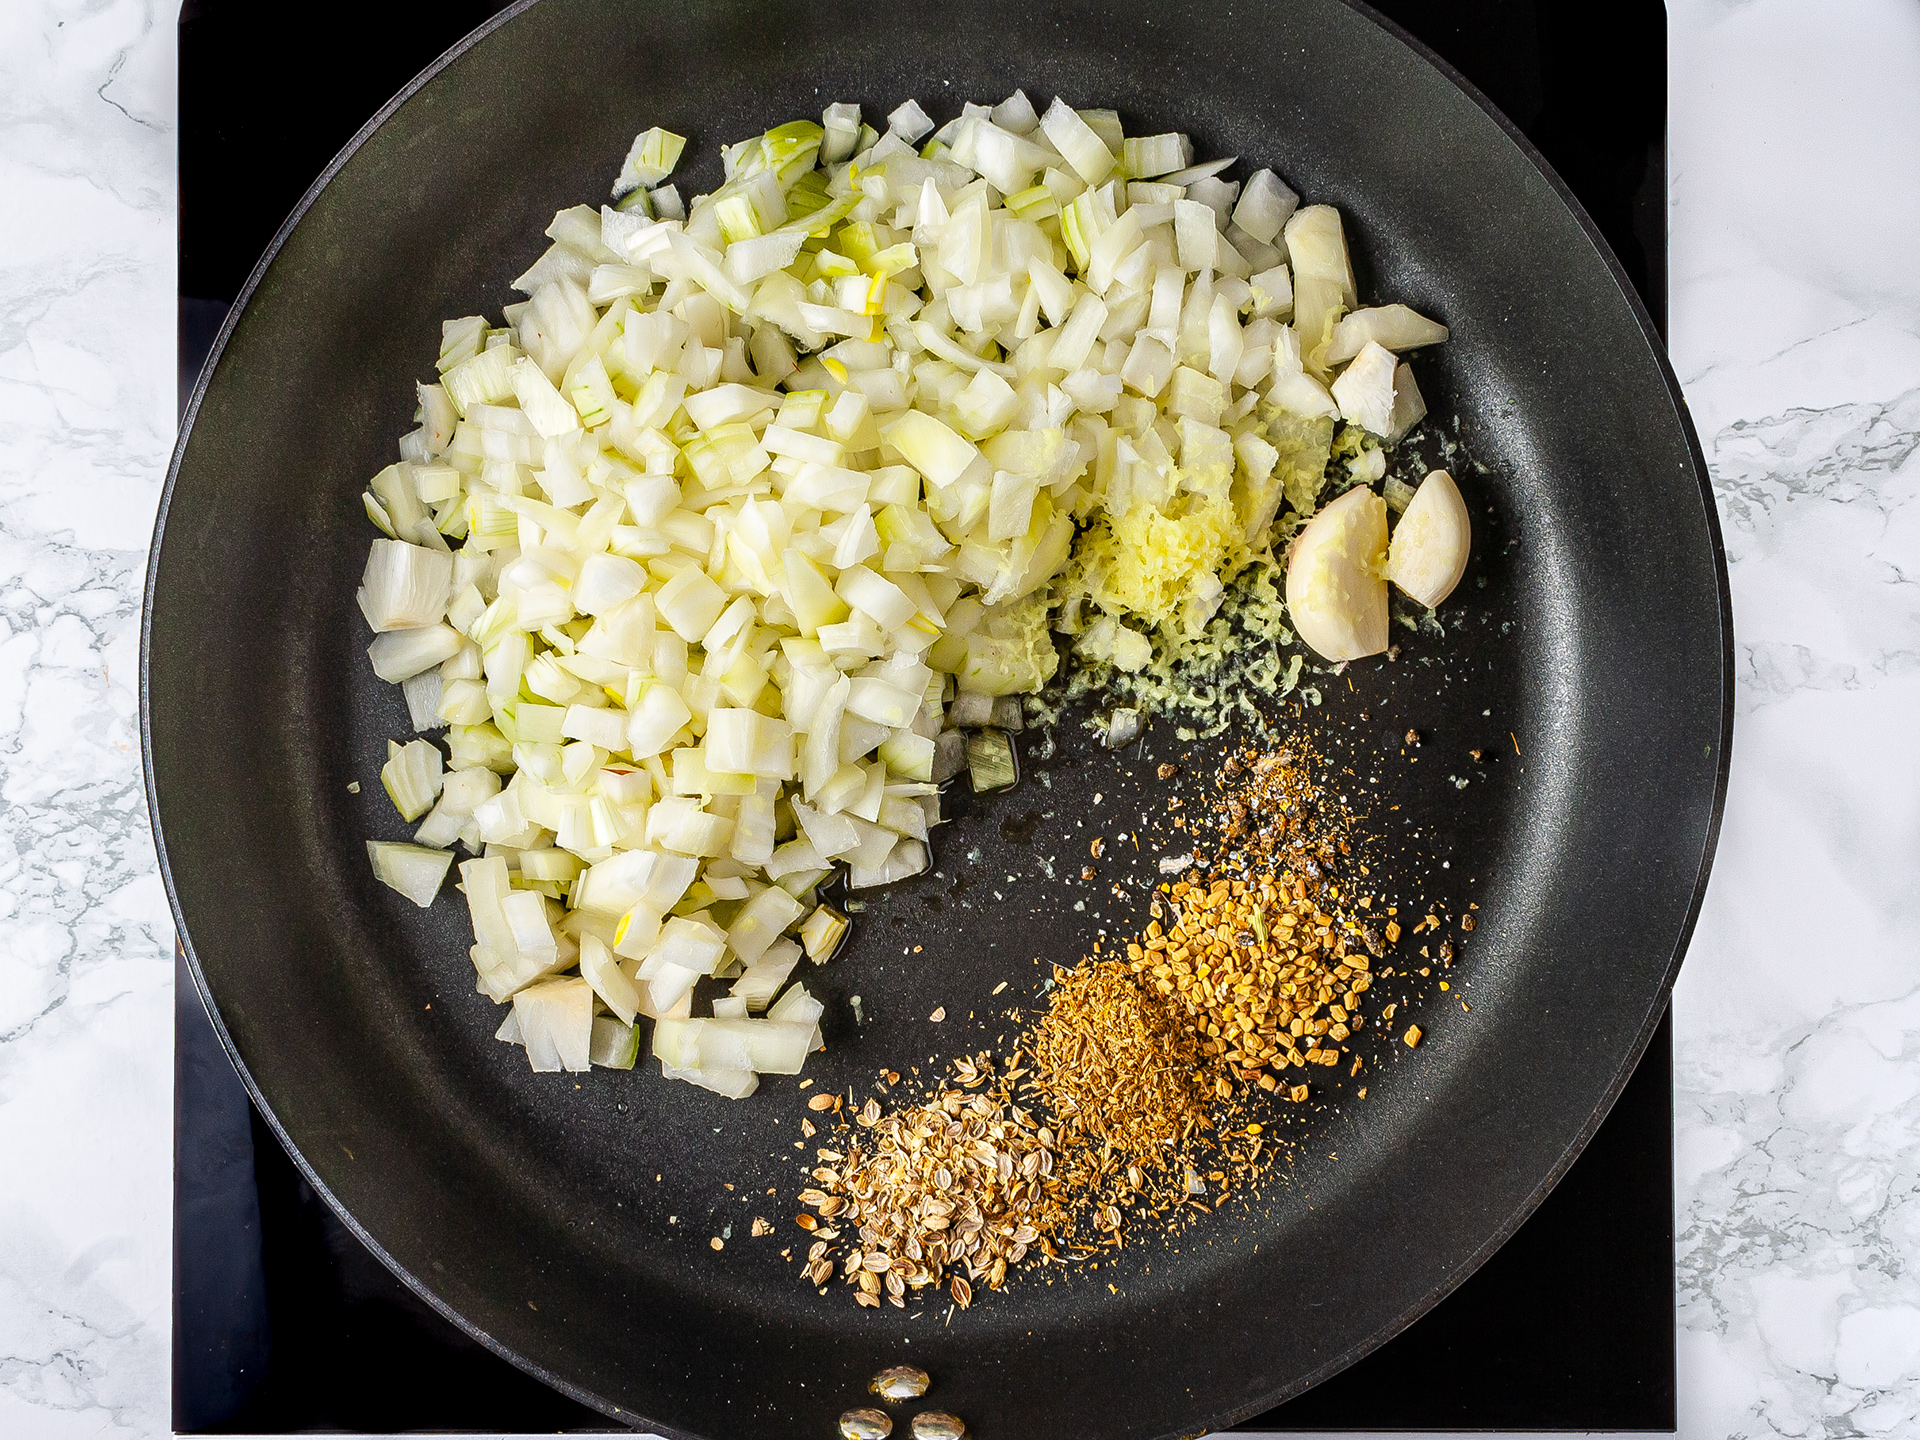 Onions, garlic, ginger root, cumin seeds, and coriander seeds sizzling in a pan.